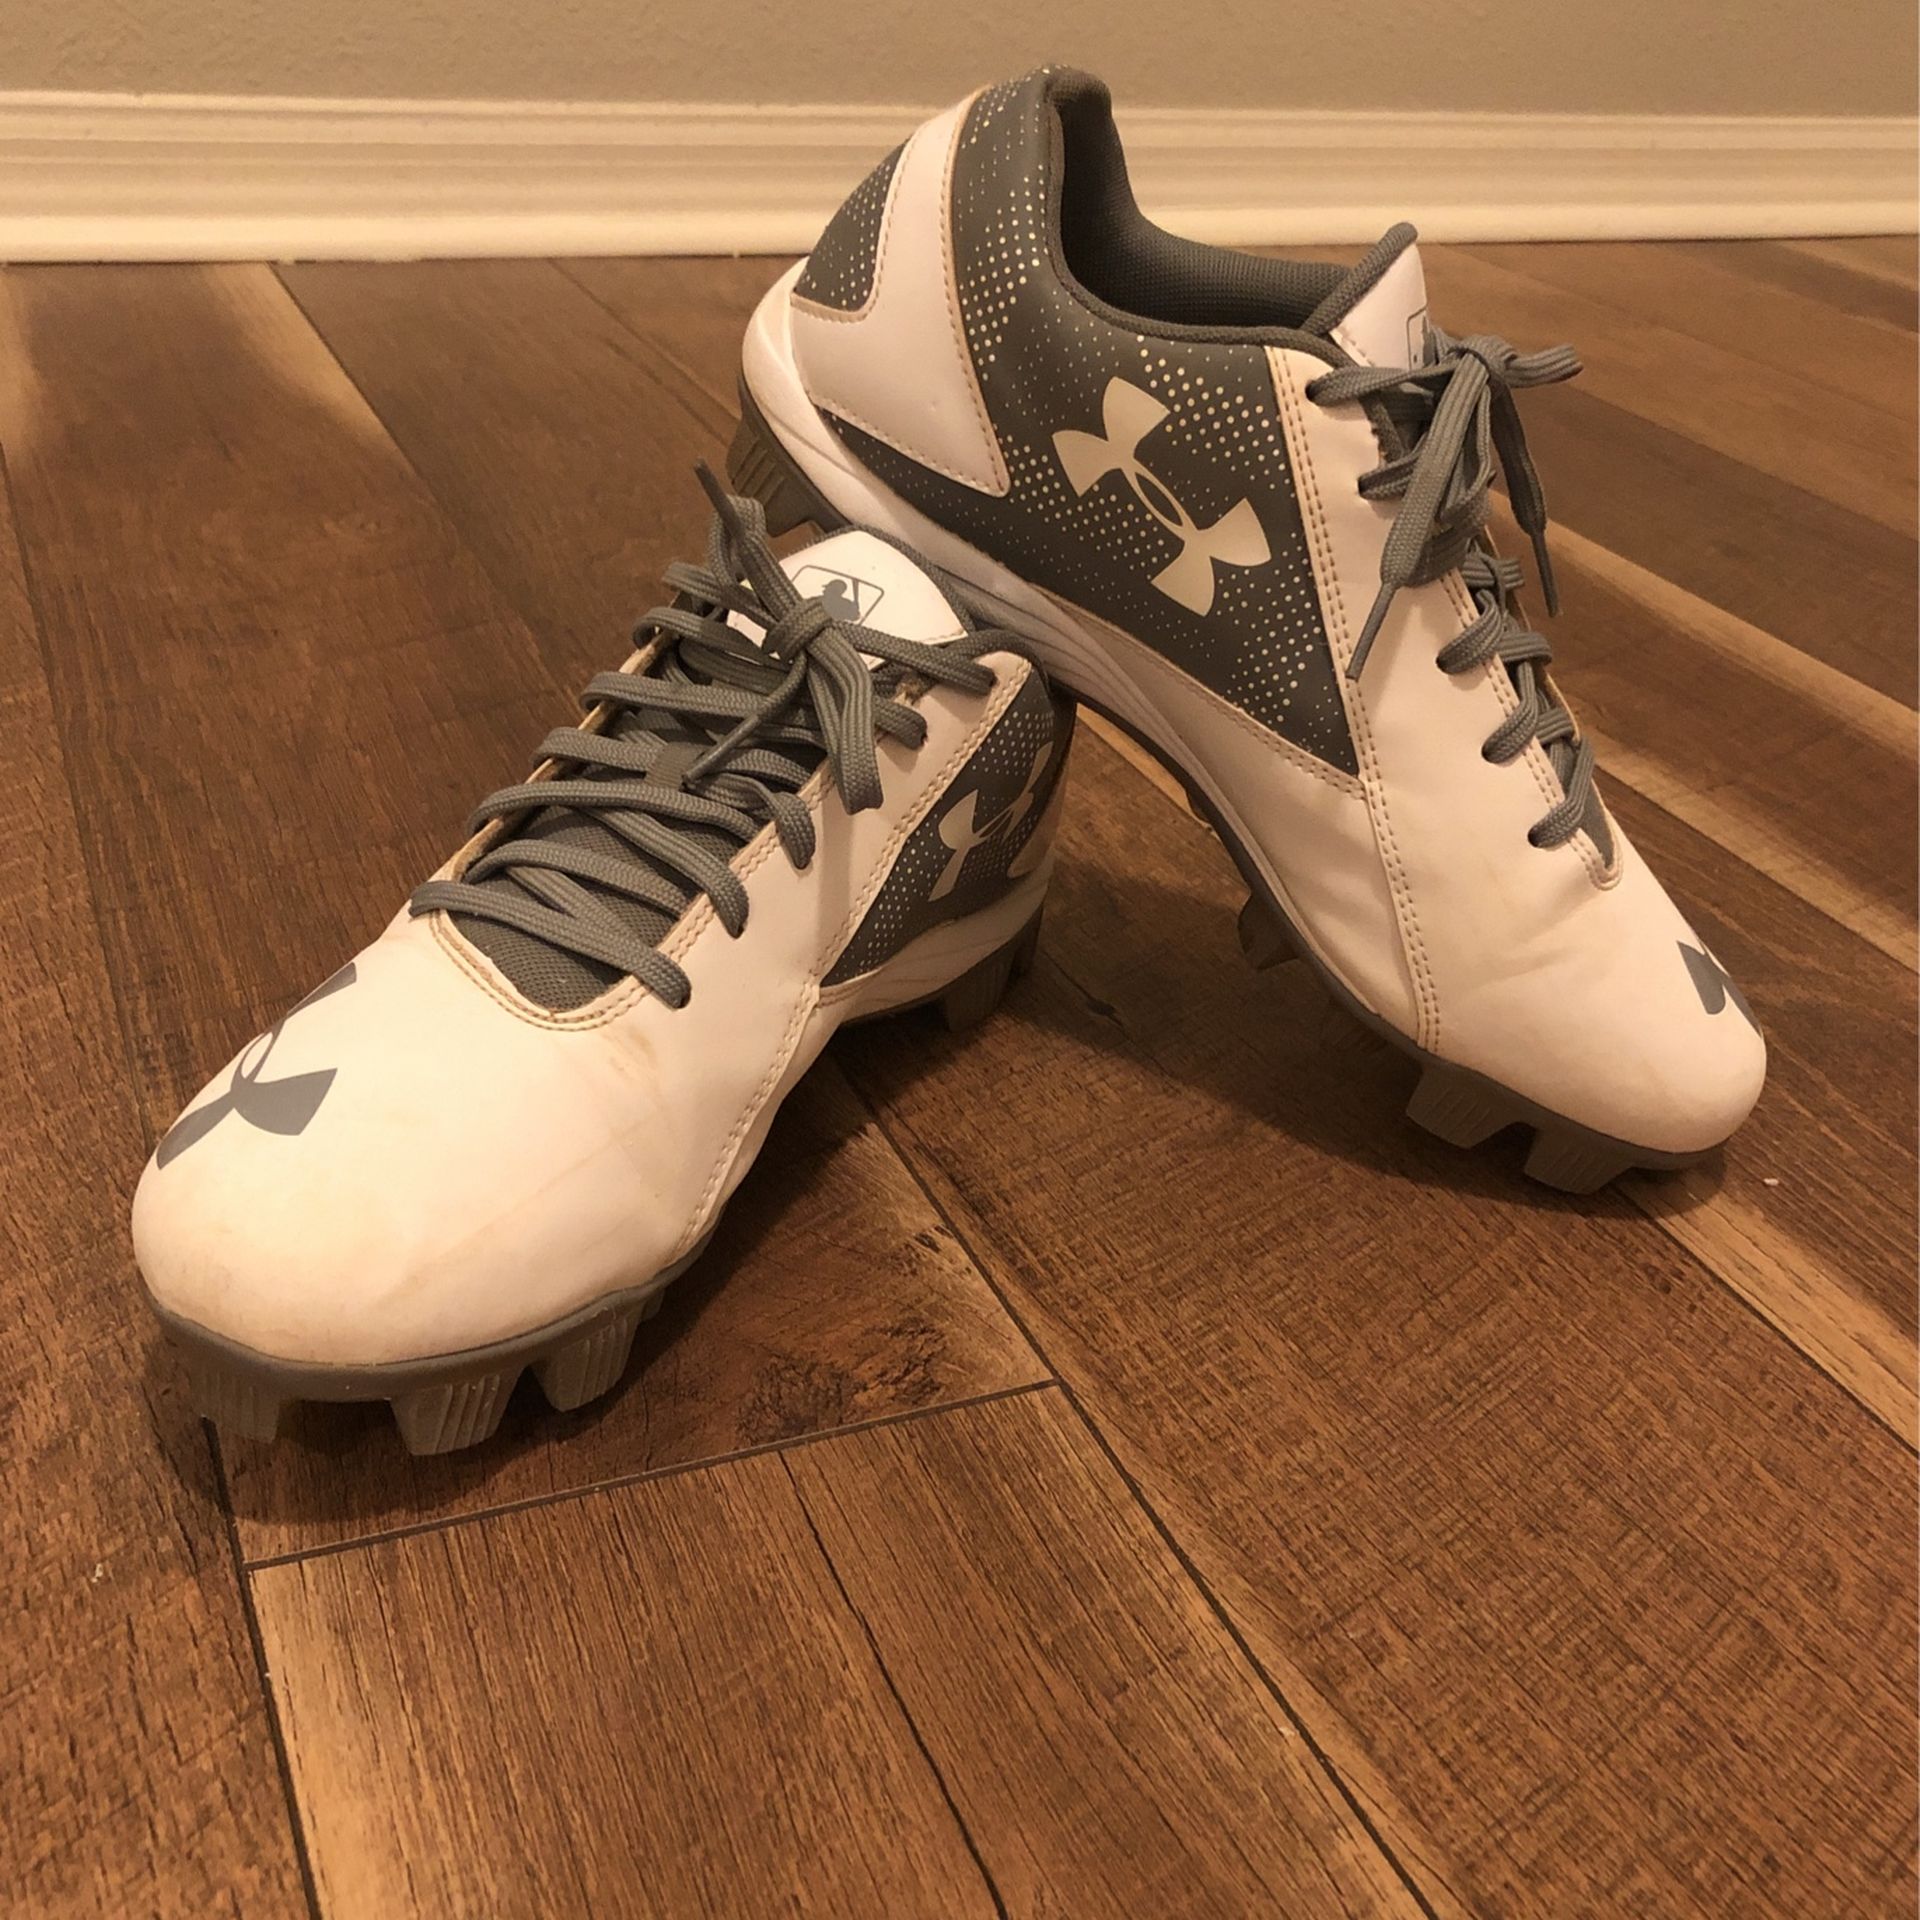 Under Armour Baseball cleats white and gray,USA Men Size 10